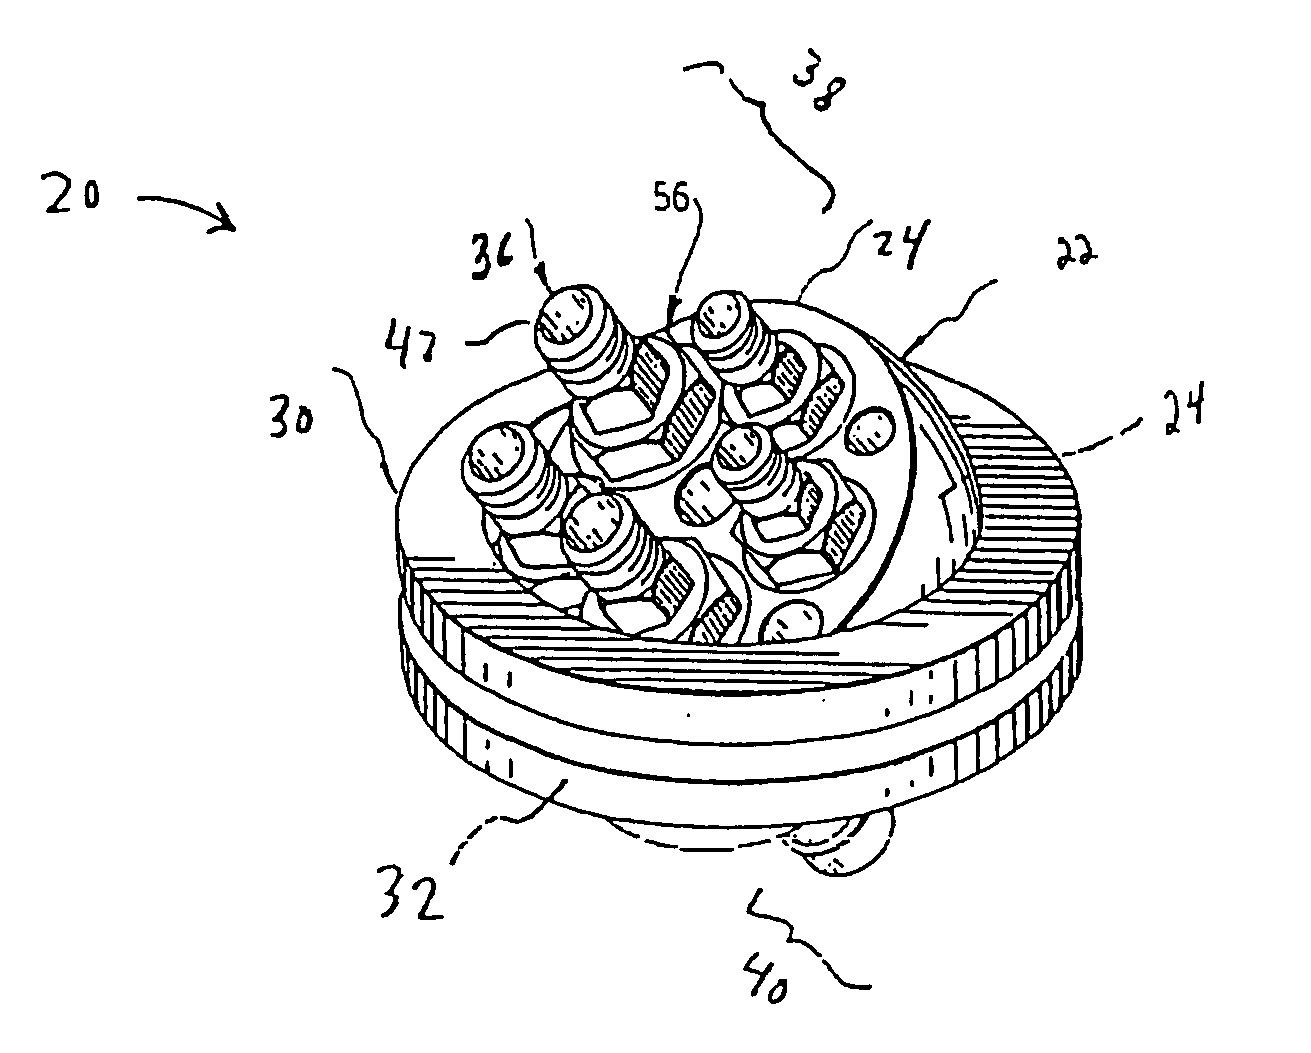 Multifunctionally swivelling coupling assembly for fluid lines